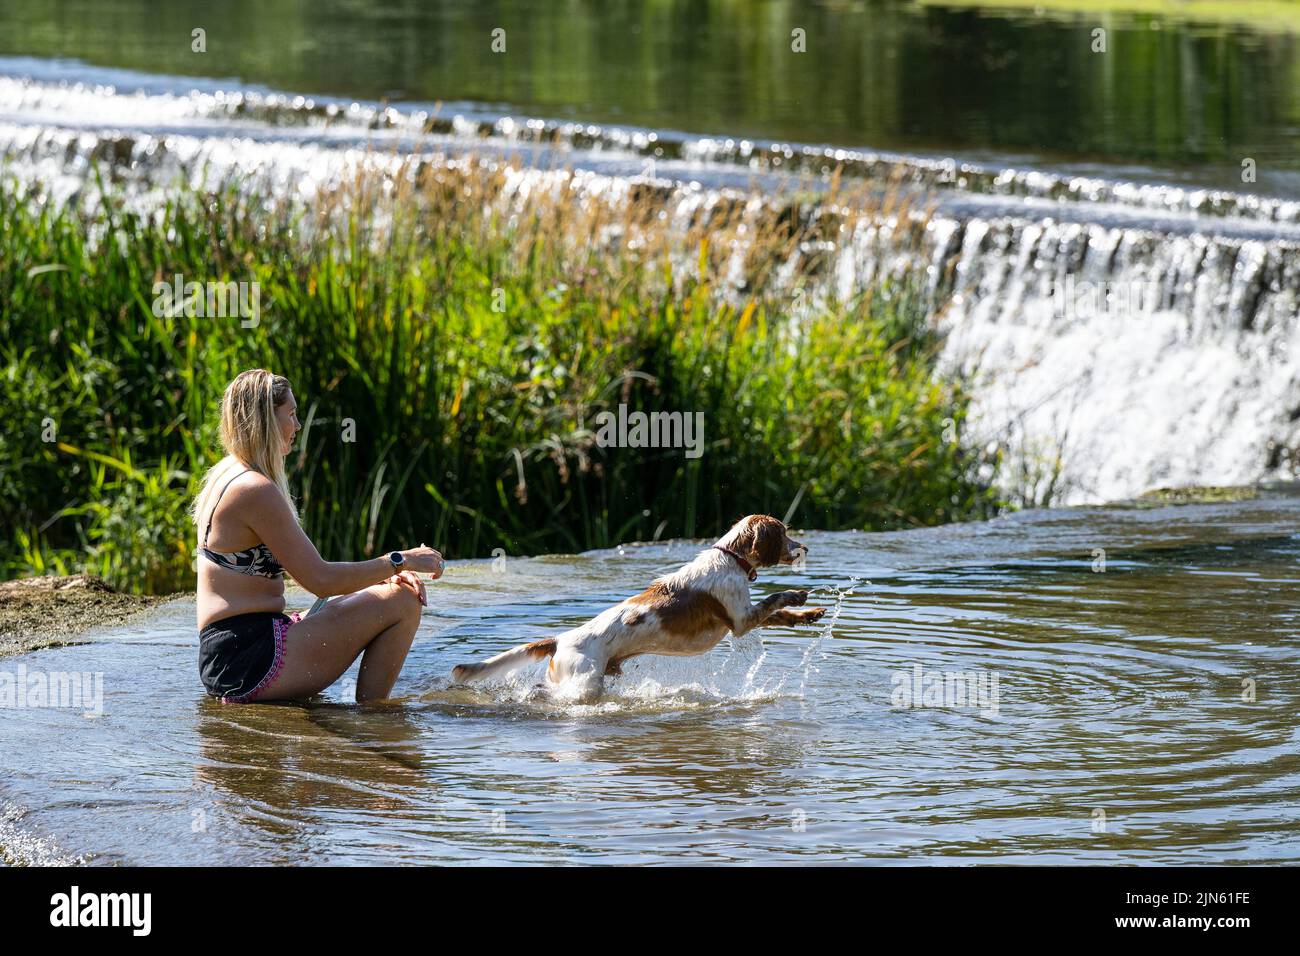 09.08.22. WEATHER SOMERSET.  People enjoy the water at Warleigh Weir on the River Avon near Bath in Somerset as temperatures continue to soar across t Stock Photo